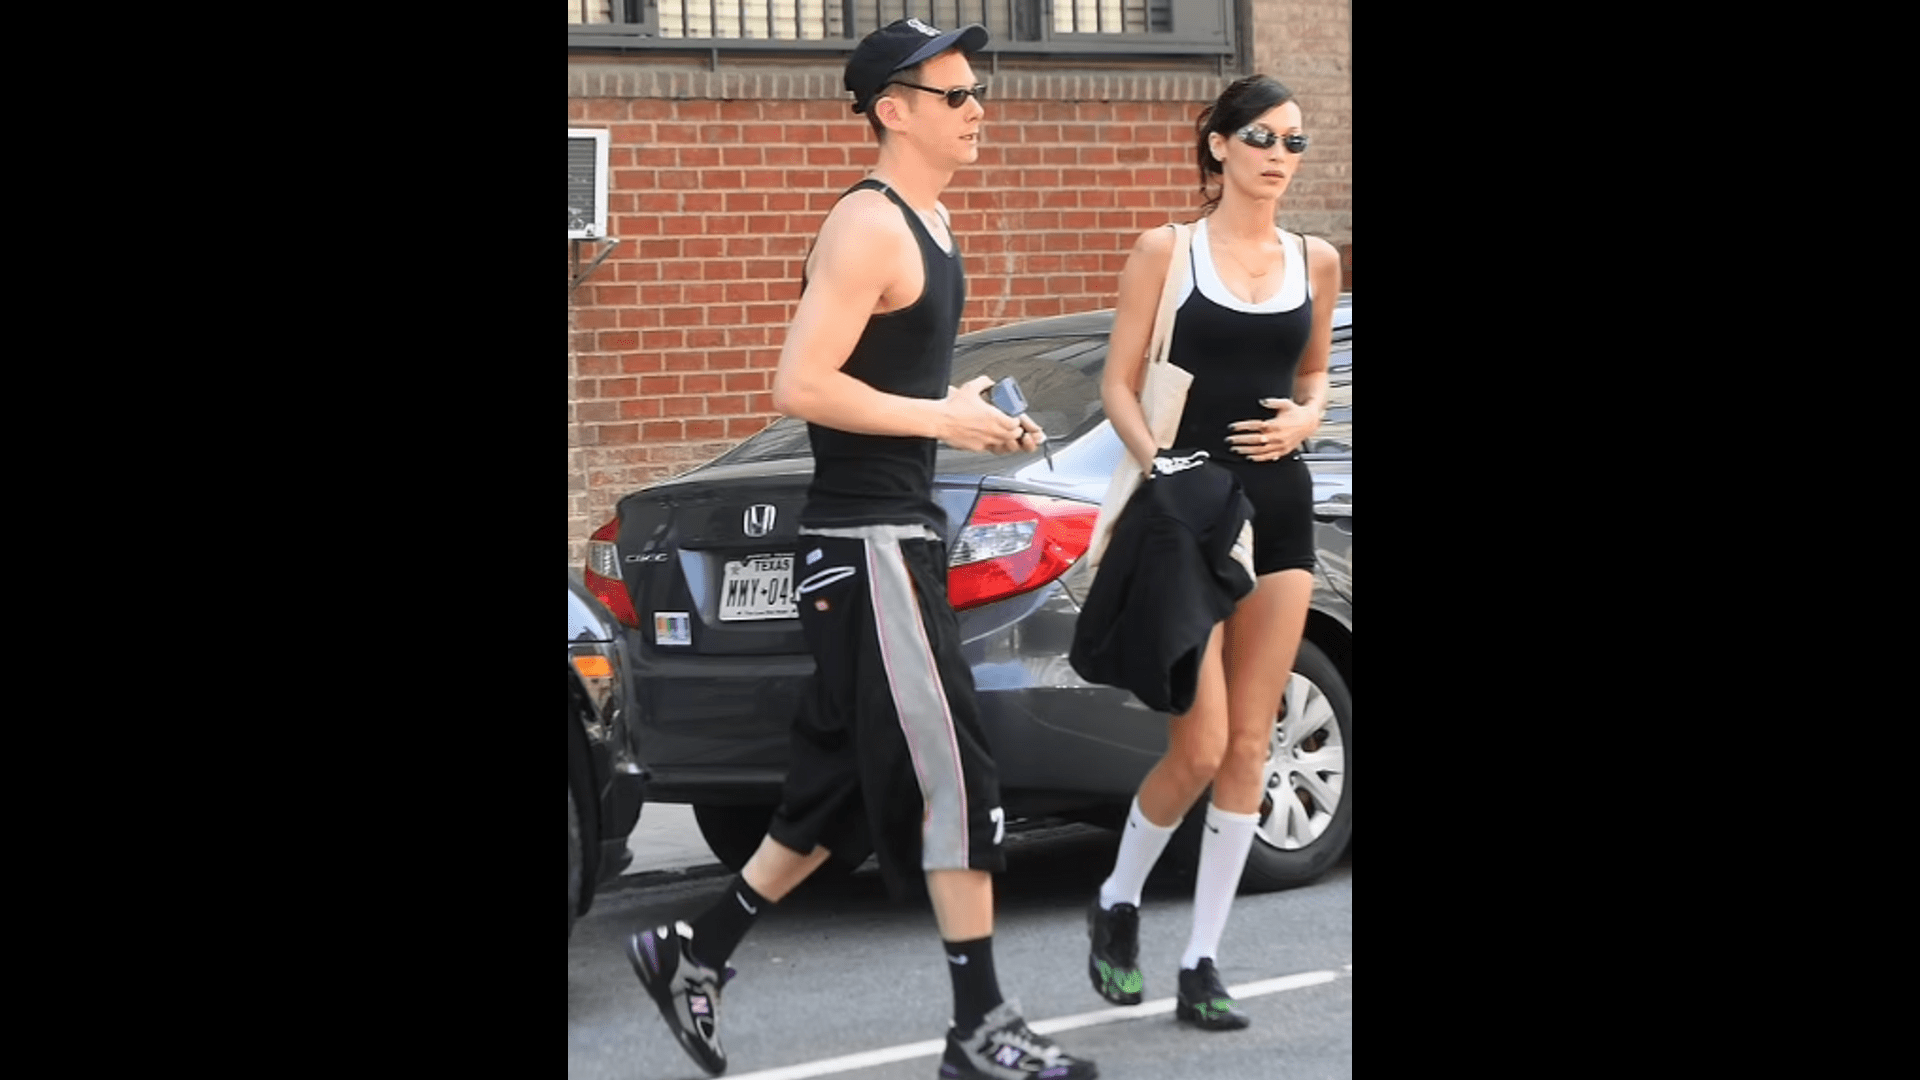 ”bella-hadid-and-her-boyfriend-marc-kalman-were-spotted-on-their-way-to-the-gym”